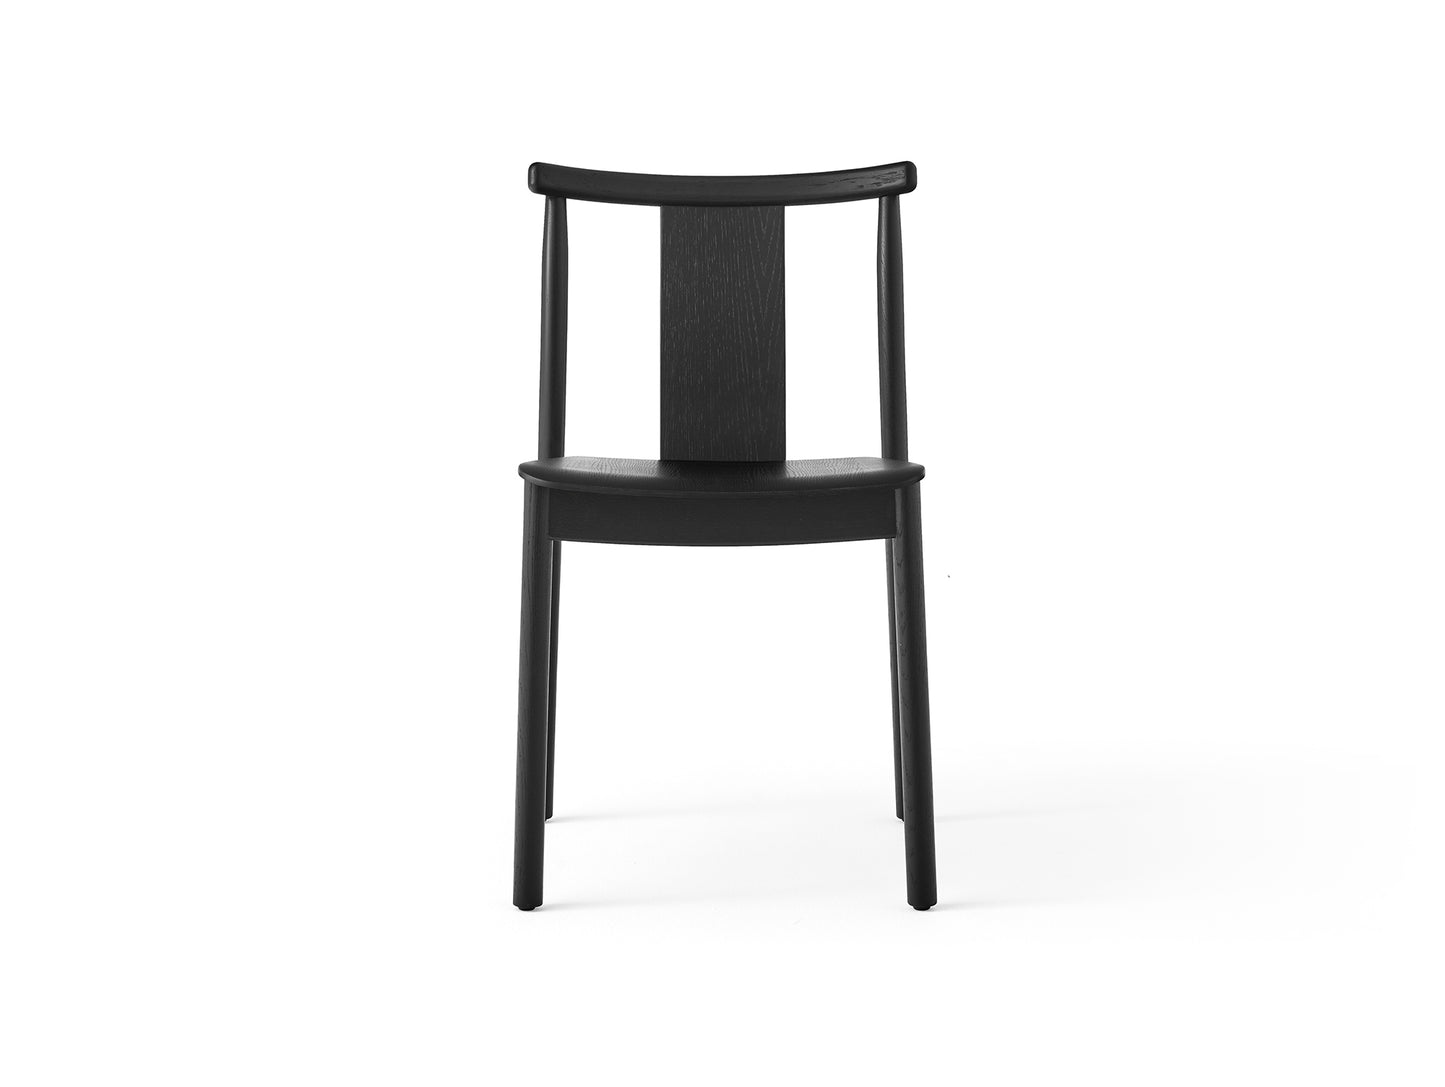 Merkur Dining Chair without Armrest by Menu - Black Lacquered Oak